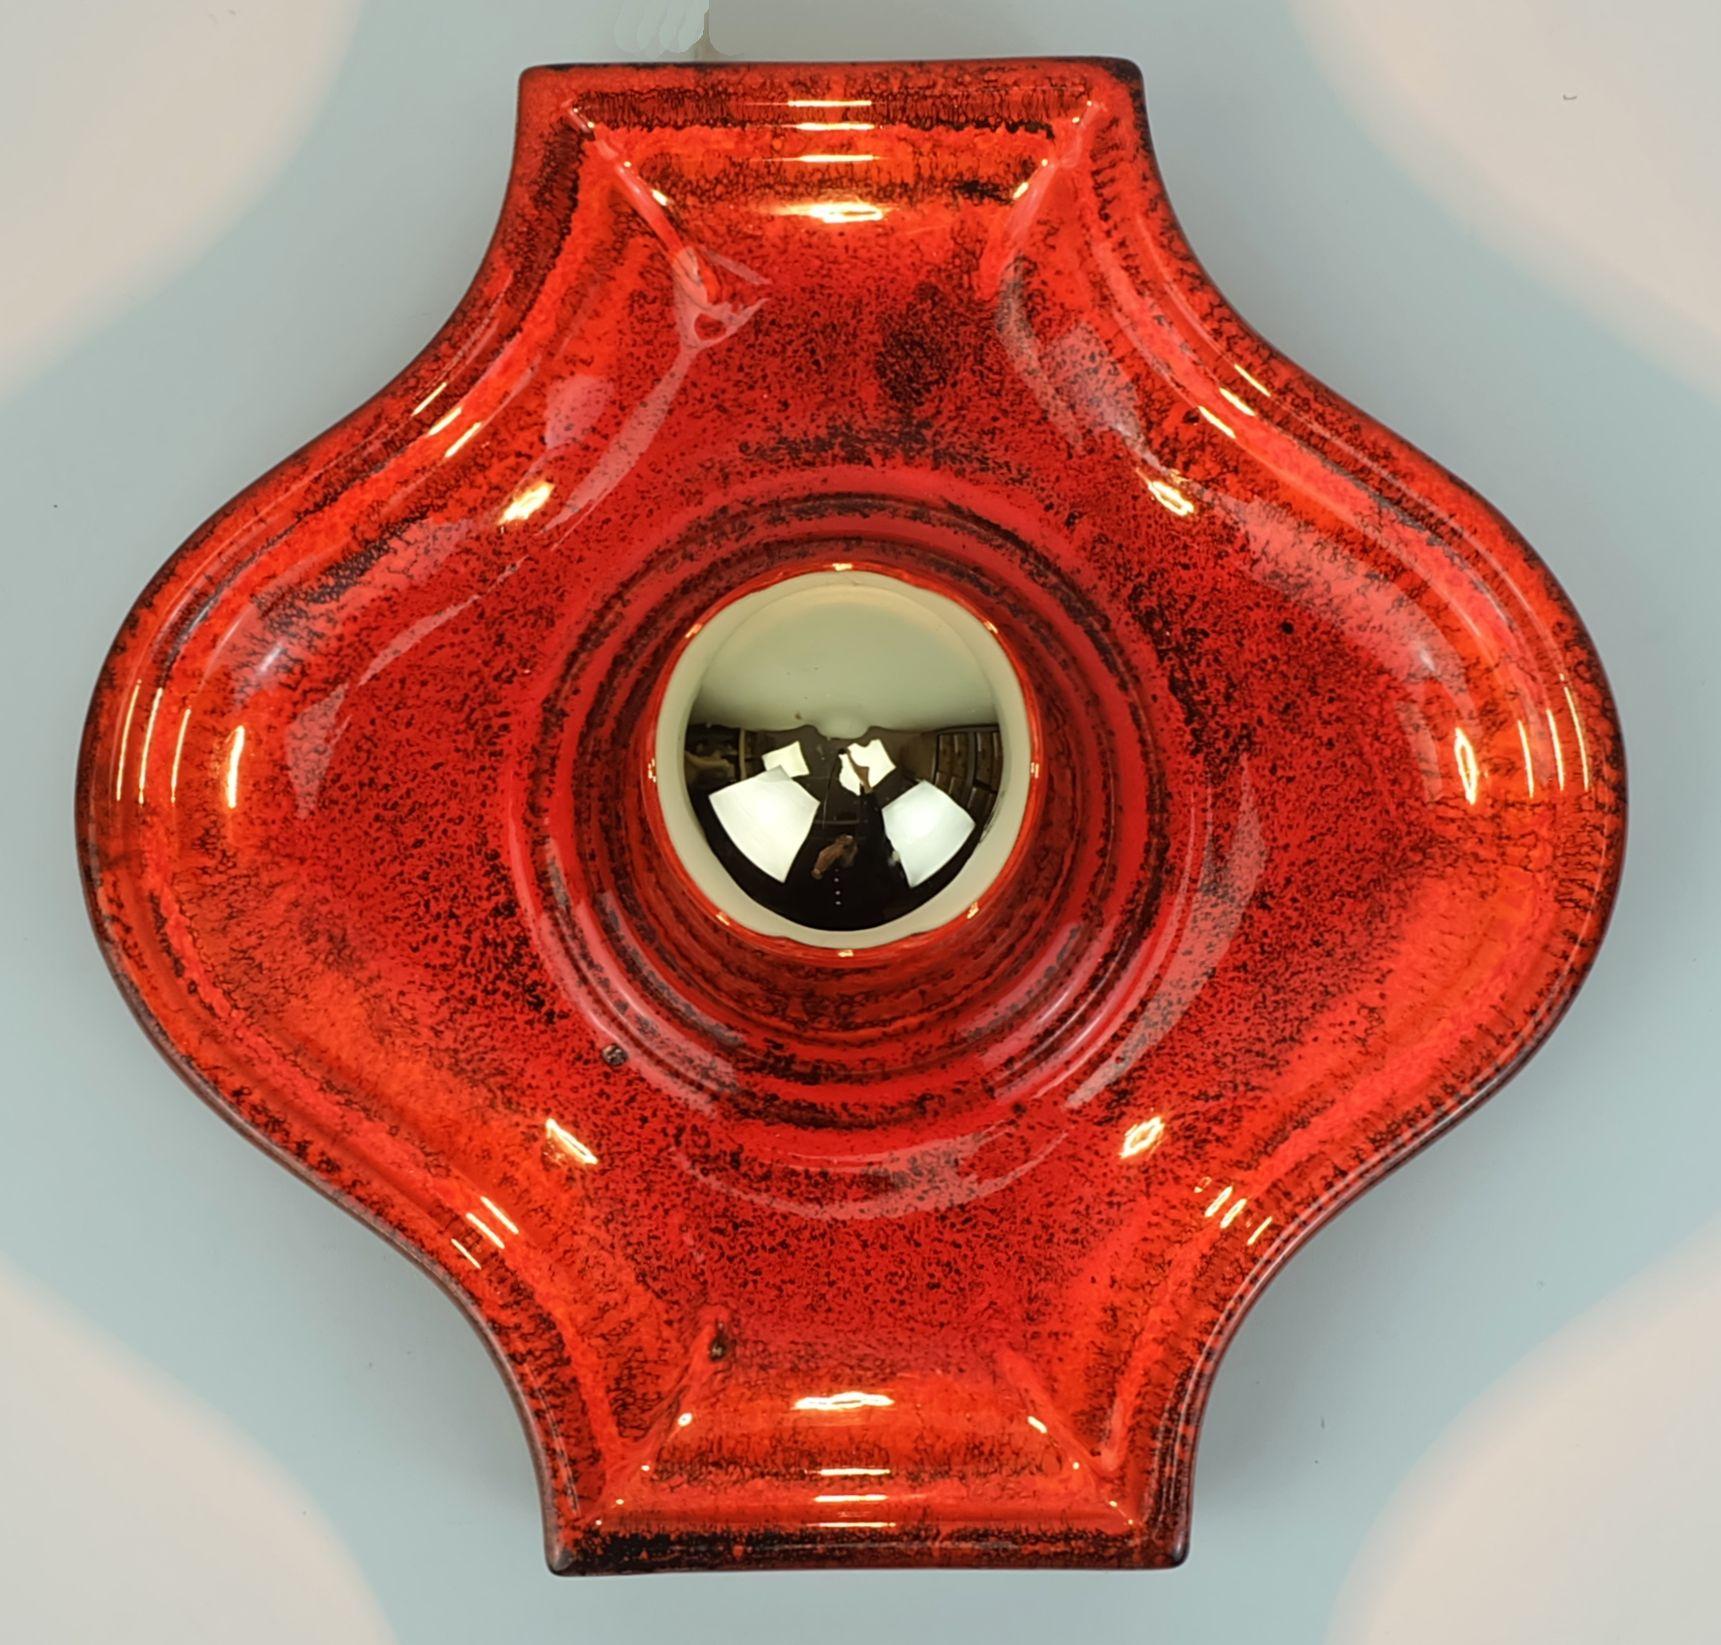 Mid century ceramic wall lamp manufactured in the late 1960s to early 1970s. Shiny glaze in red, orange and black. Holds 1 E27 light bulb (the light bulb in the pictures is not included in the item price). 

Dimensions per lamp in cm: 
Width 26 cm,